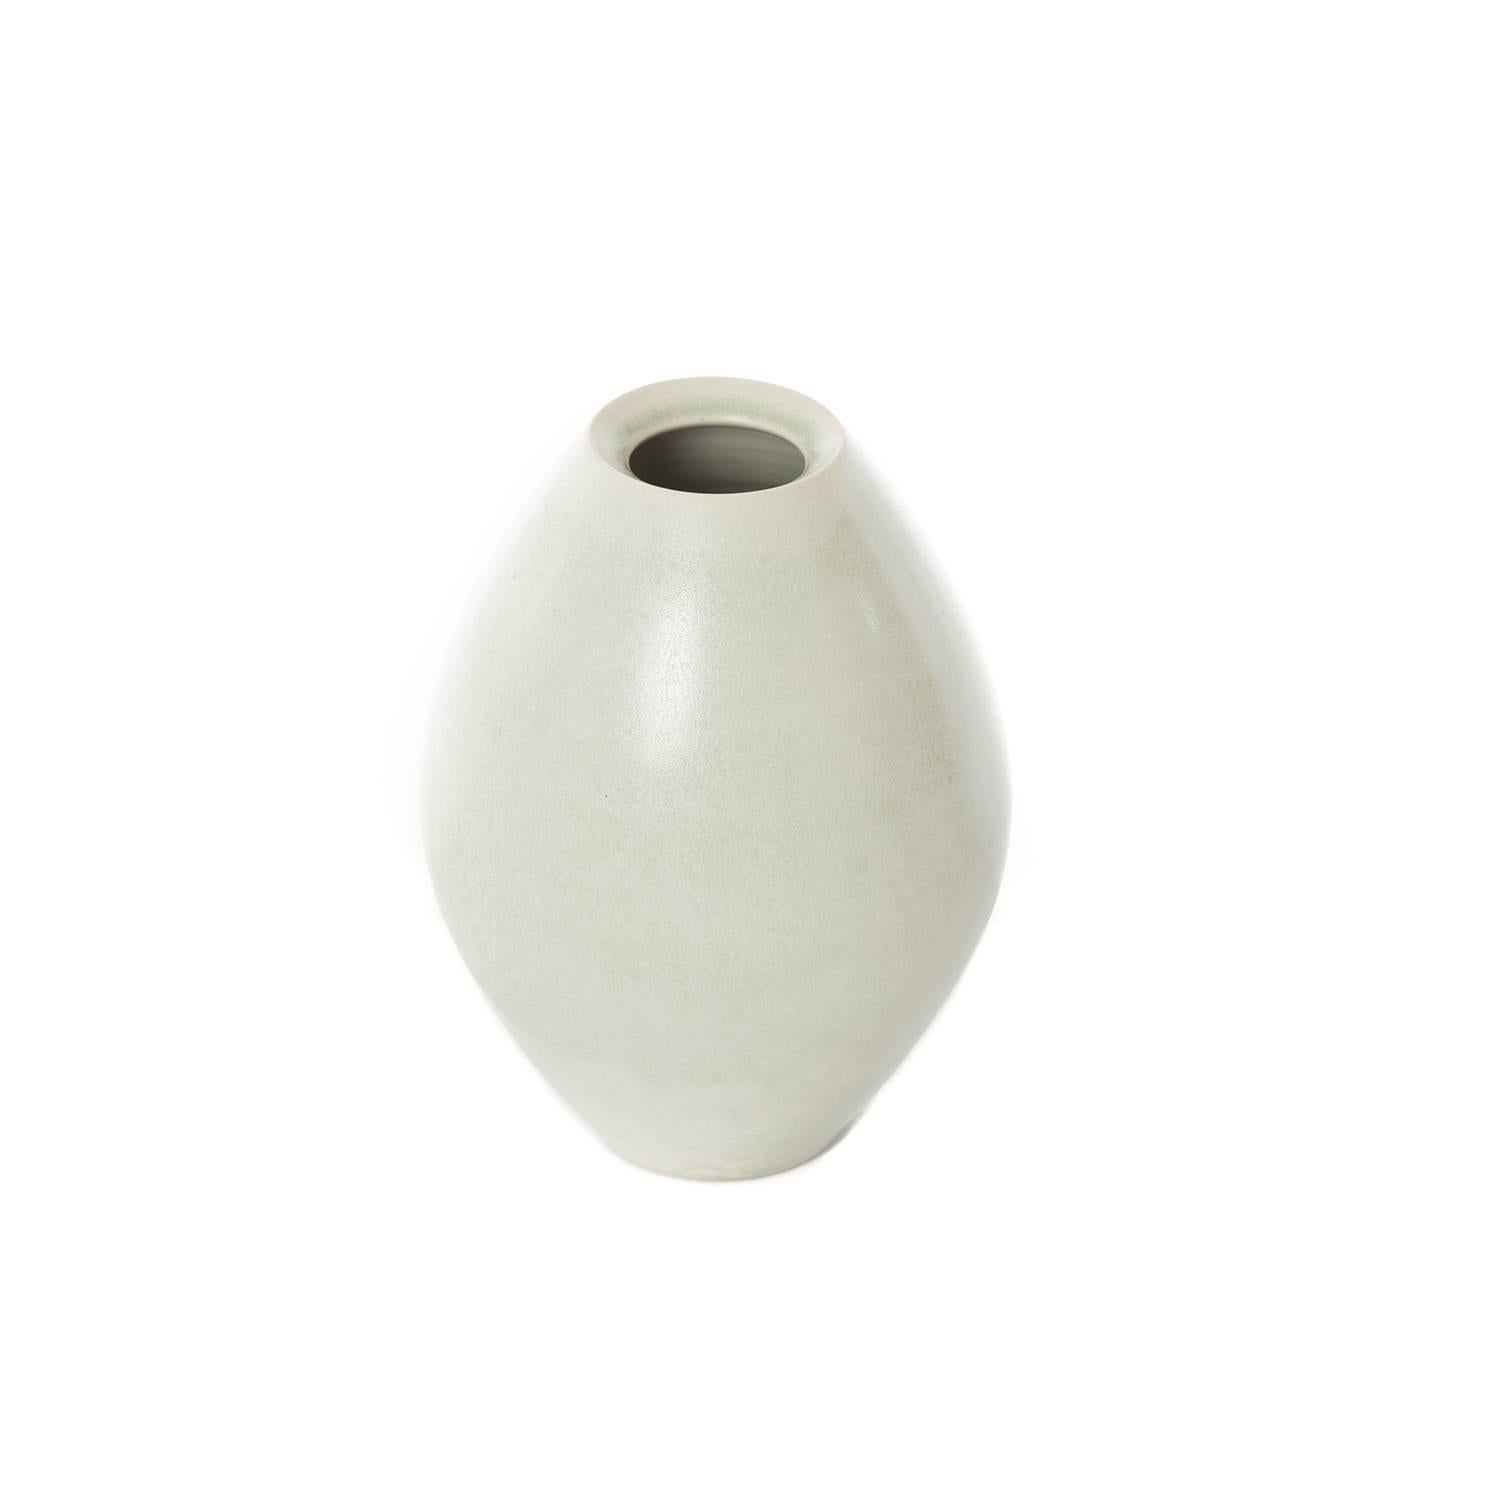 This new item is a glazed heavyweight porcelain vase that is glazed with a pale 'mineral' grey green cast. Signed by the artist. Created by the artist for west shore collection. Appropriate as a stand alone object of art but also usable as a vase